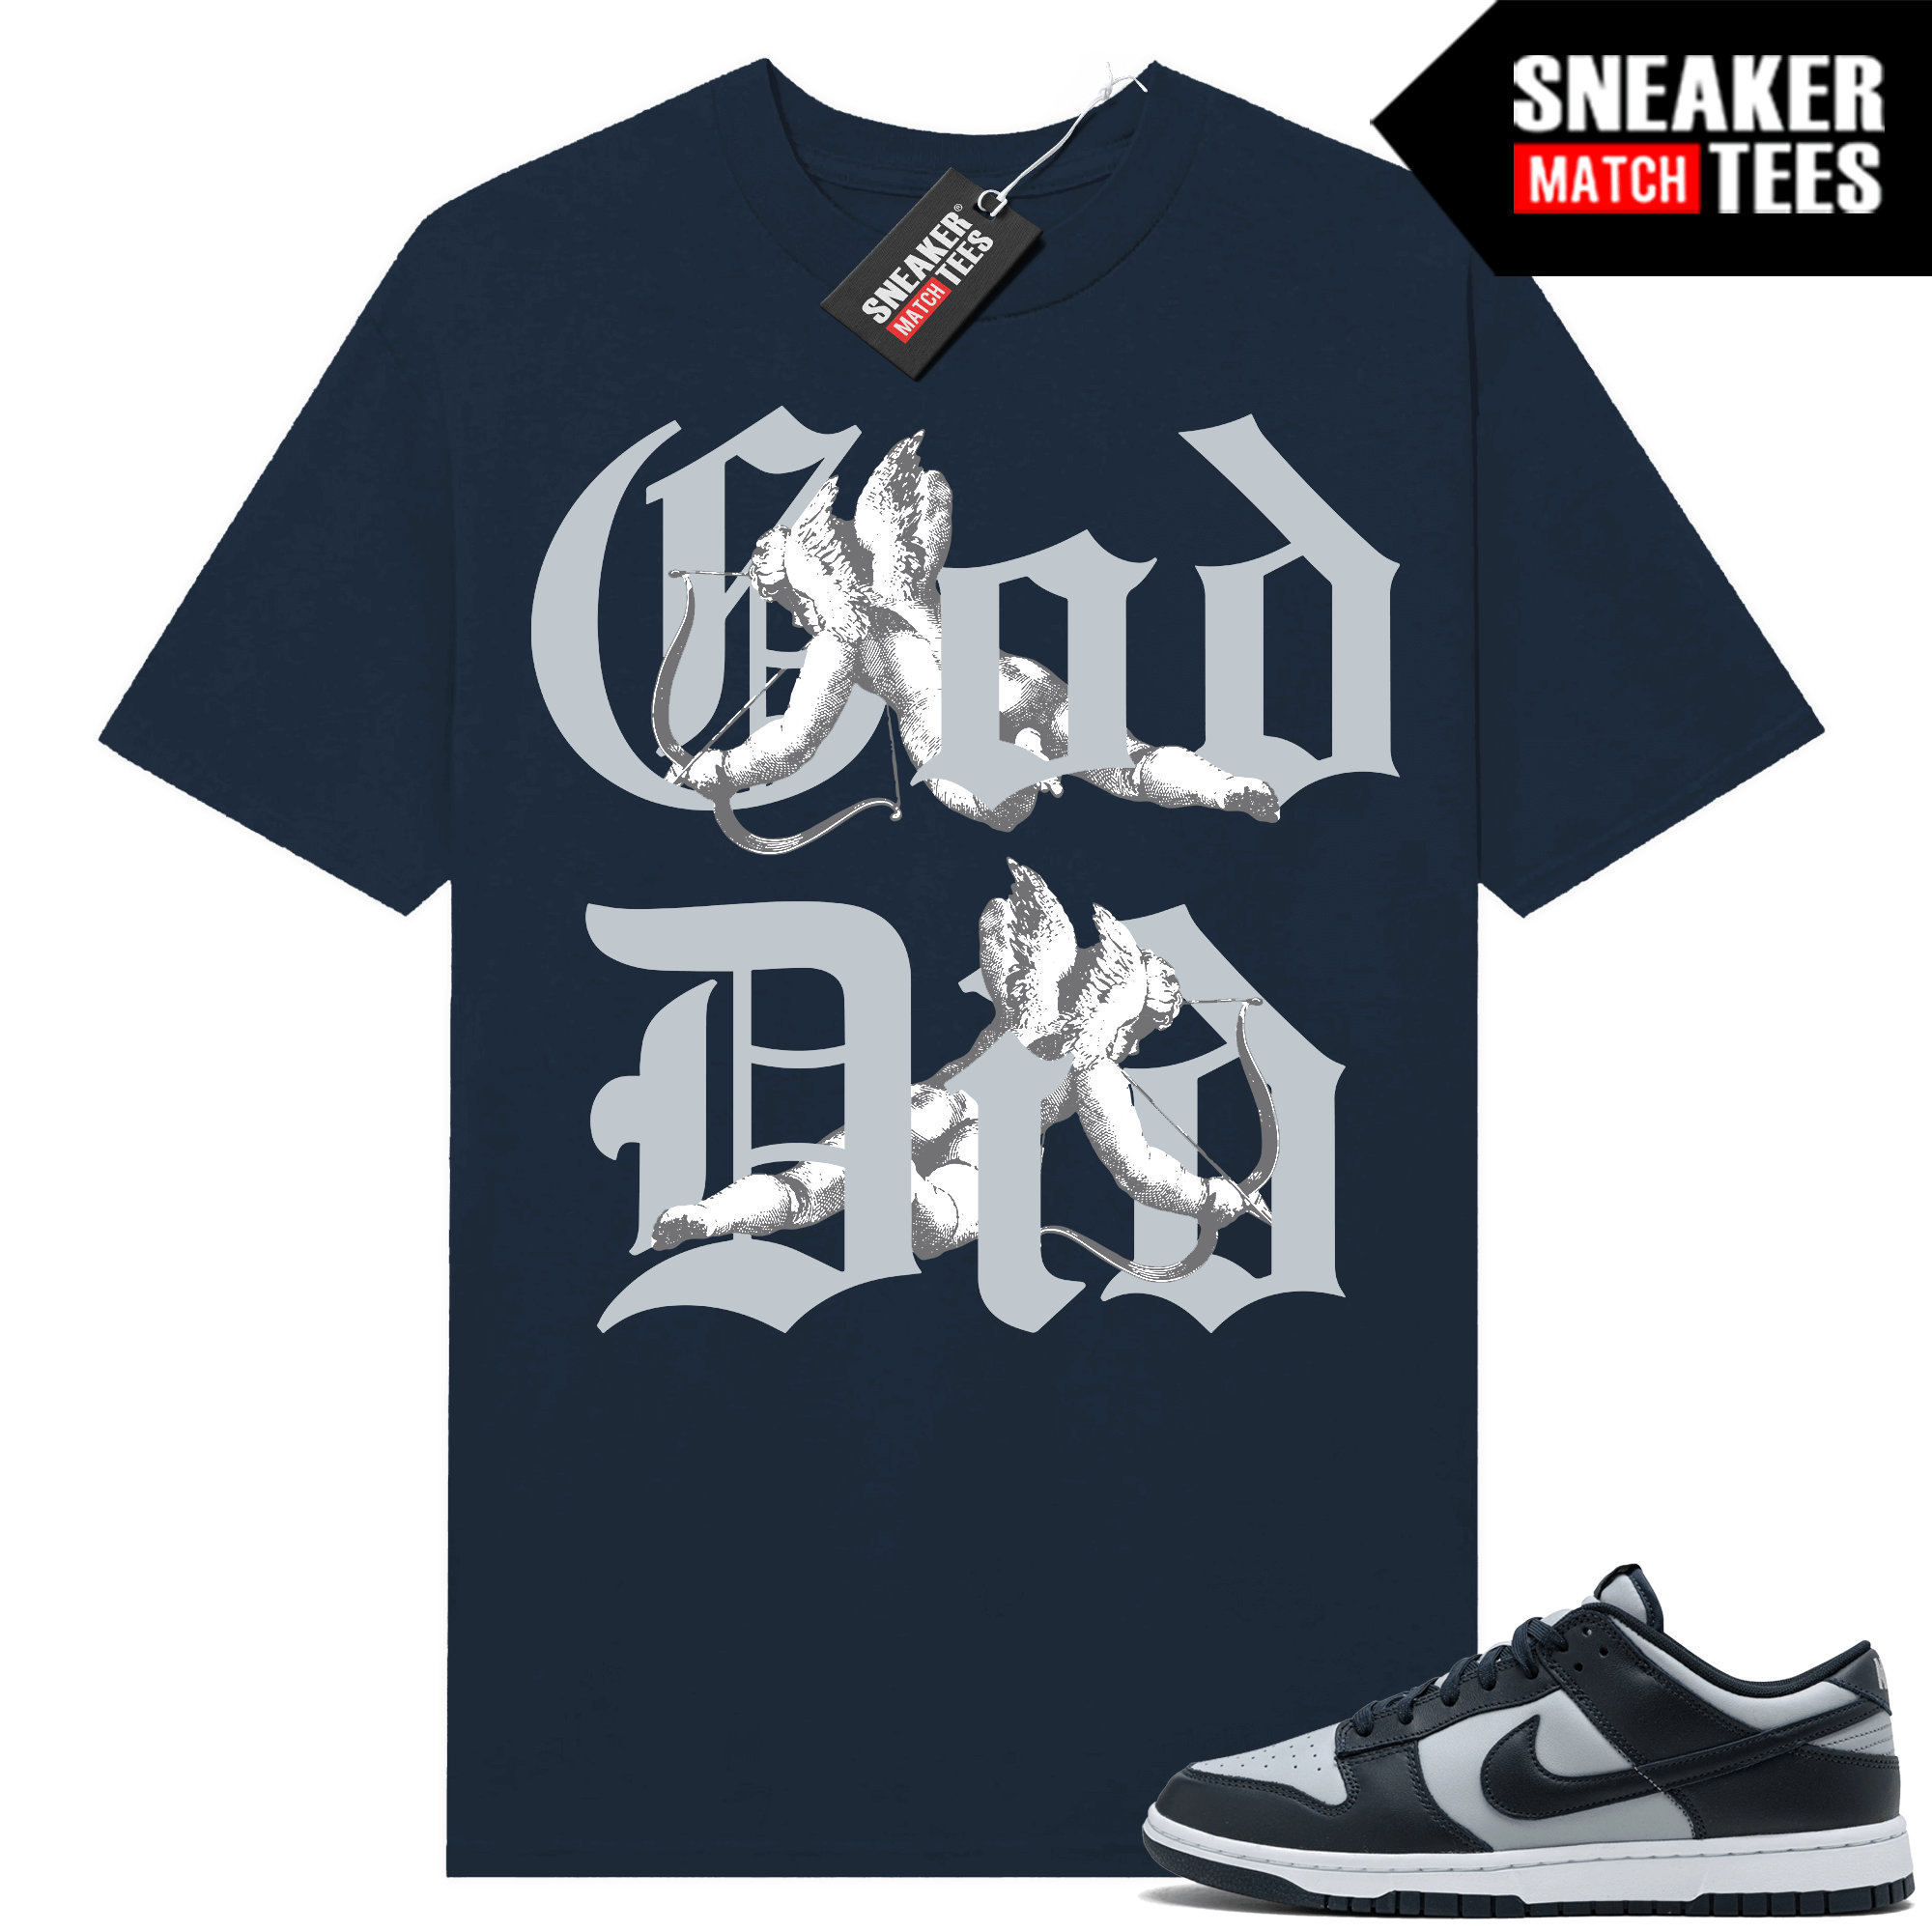 Georgetown Dunk Low to match Sneaker Match Tees Navy "God Did"